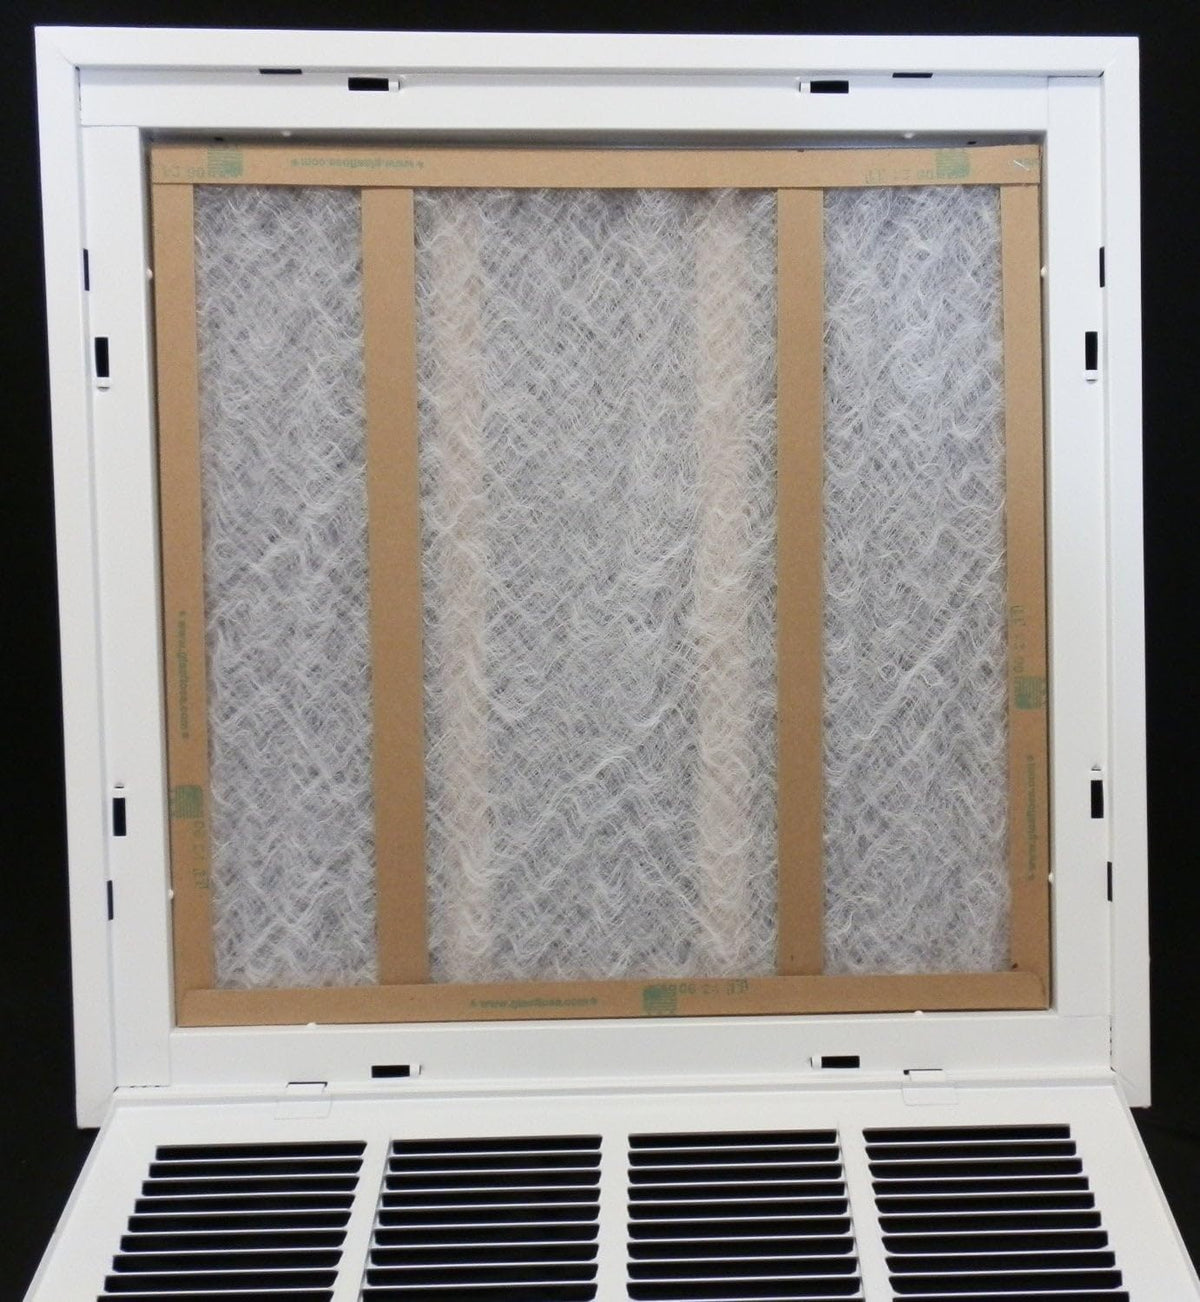 28&quot; X 22&quot; Steel Return Air Filter Grille for 1&quot; Filter - Removable Frame - [Outer Dimensions: 30 5/8&quot; X 24 5/8&quot;]